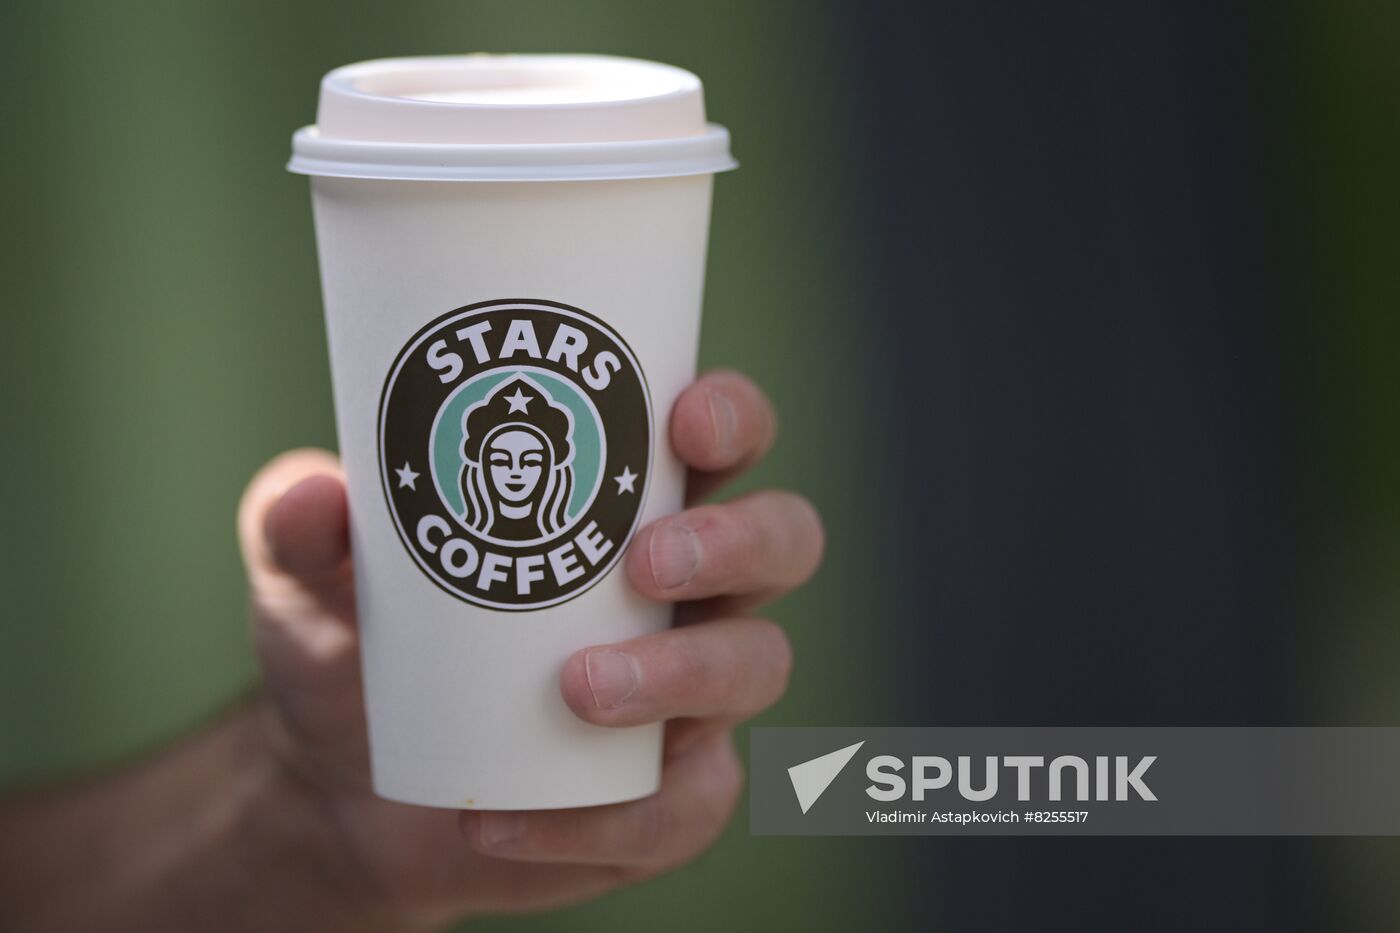 Russia Coffee Shops Chain Successor Opening